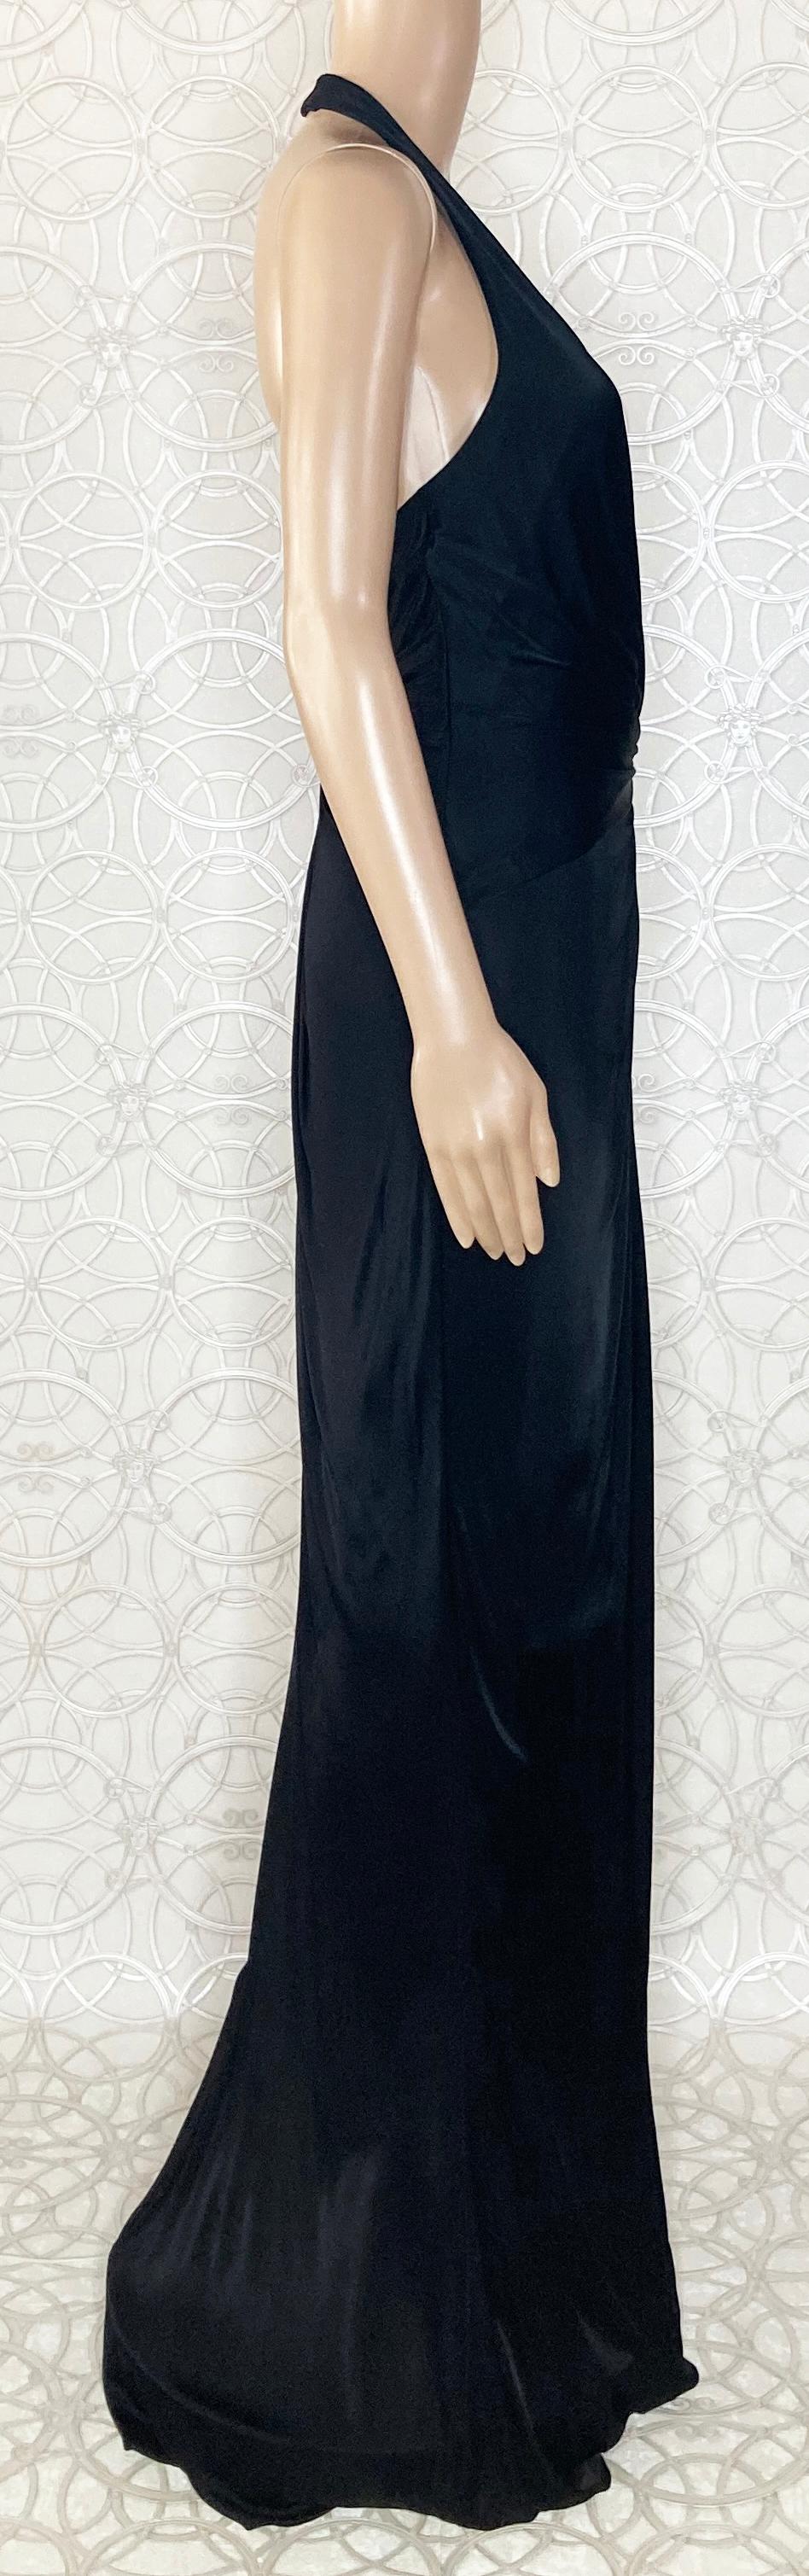 VERSACE BLACK VISCOSE LONG GOWN DRESS with OPEN BACK 42 - 6 For Sale 7